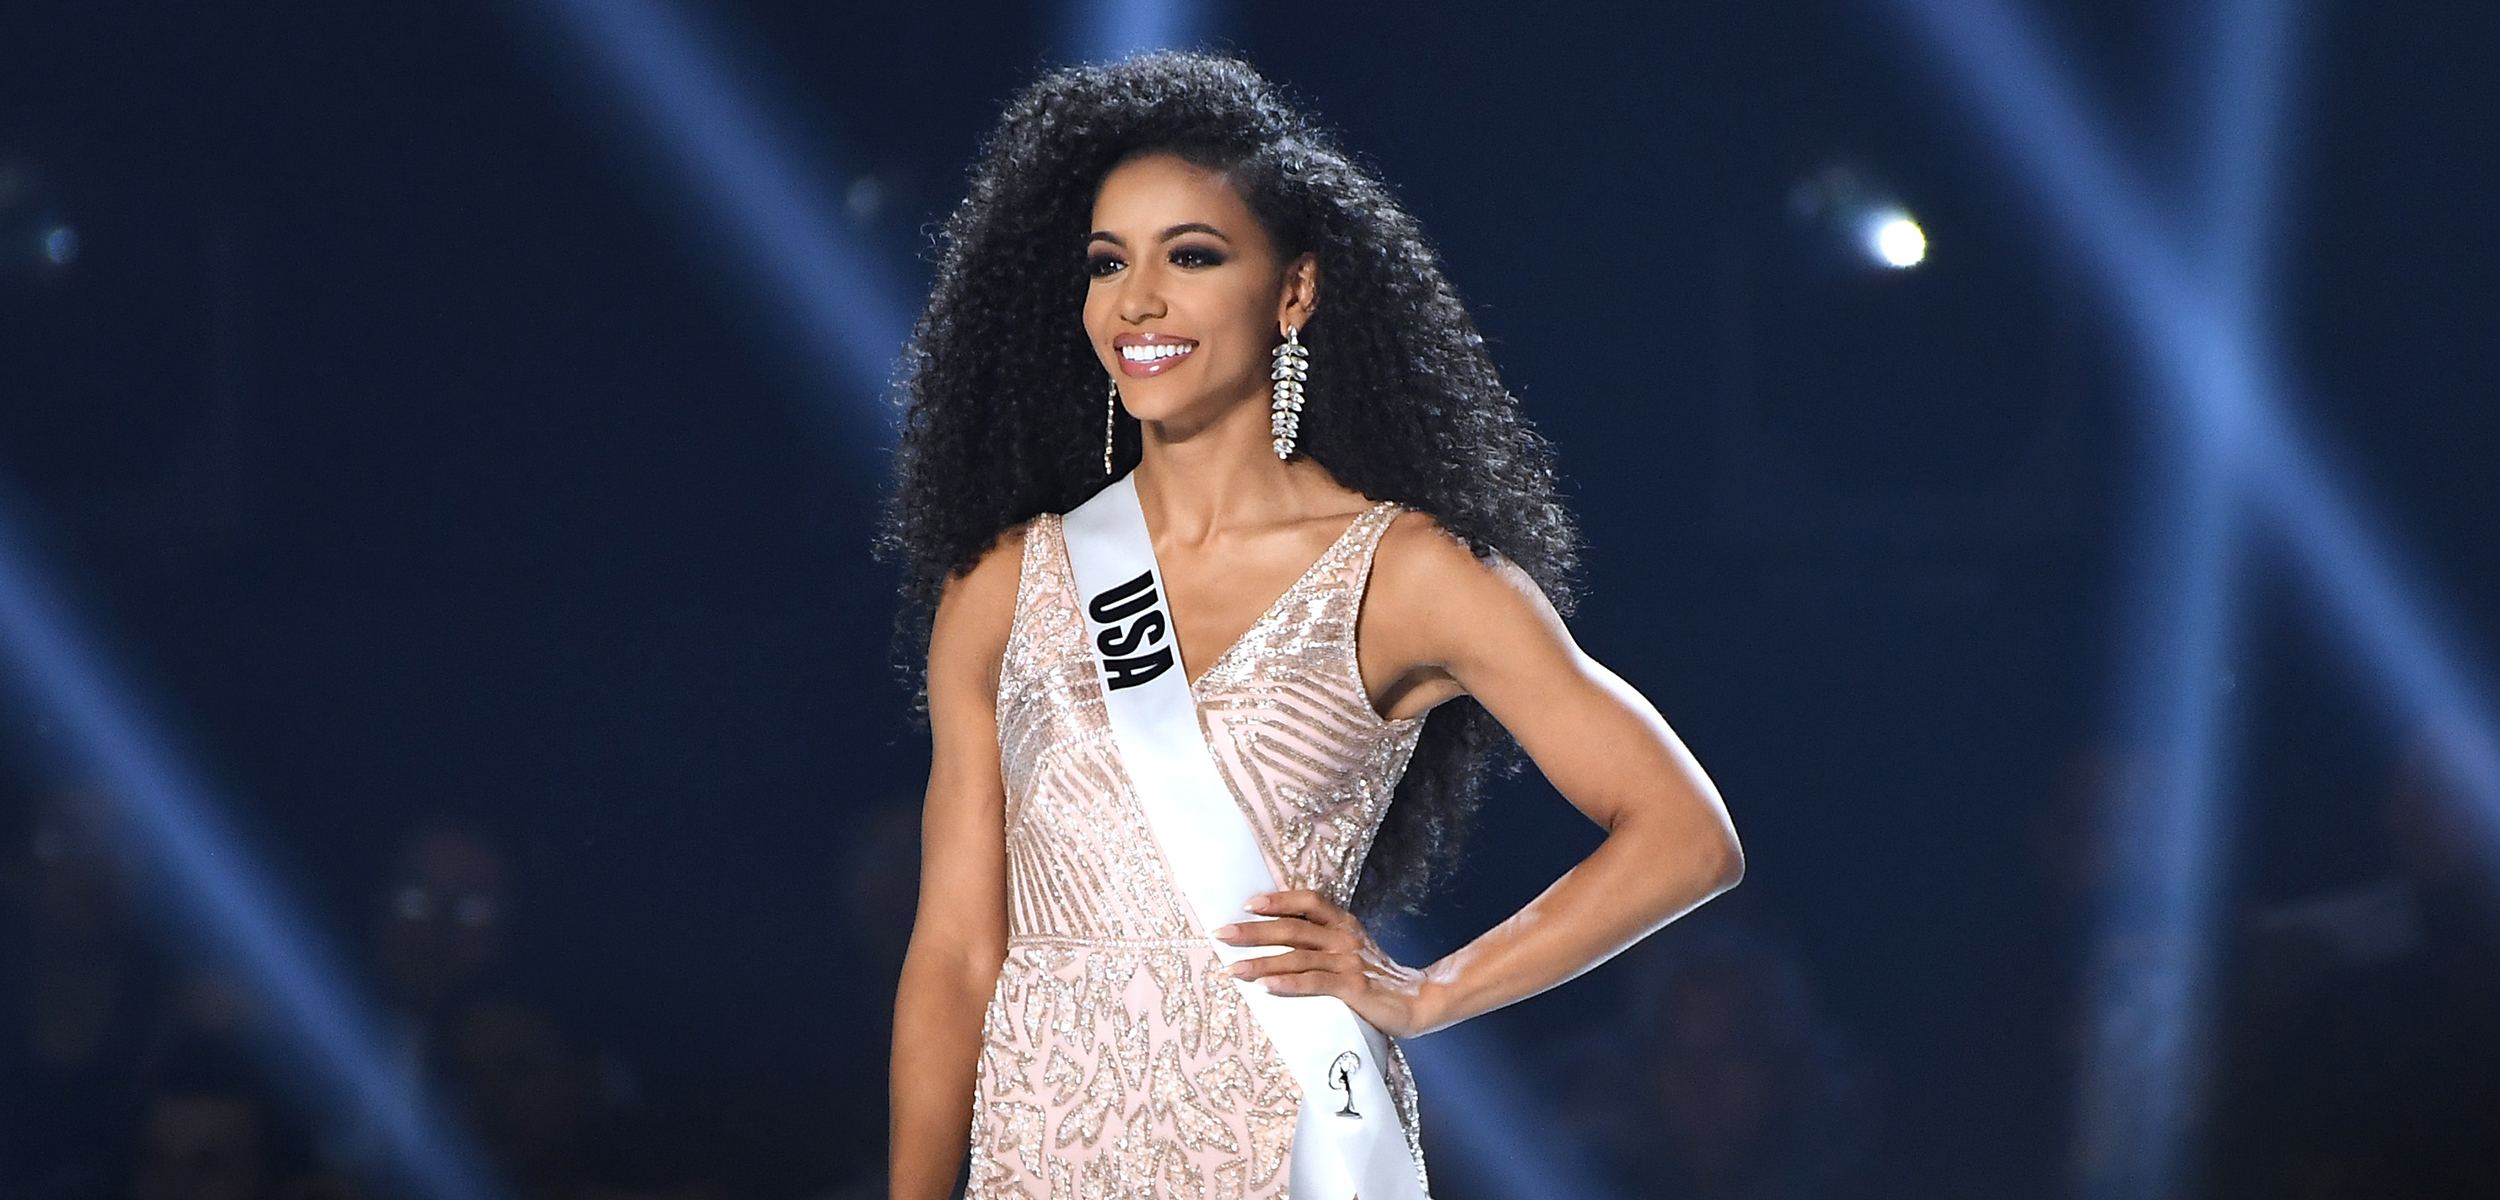 Cheslie Kryst, ‘Extra’ correspondent and former Miss USA, dies at 30